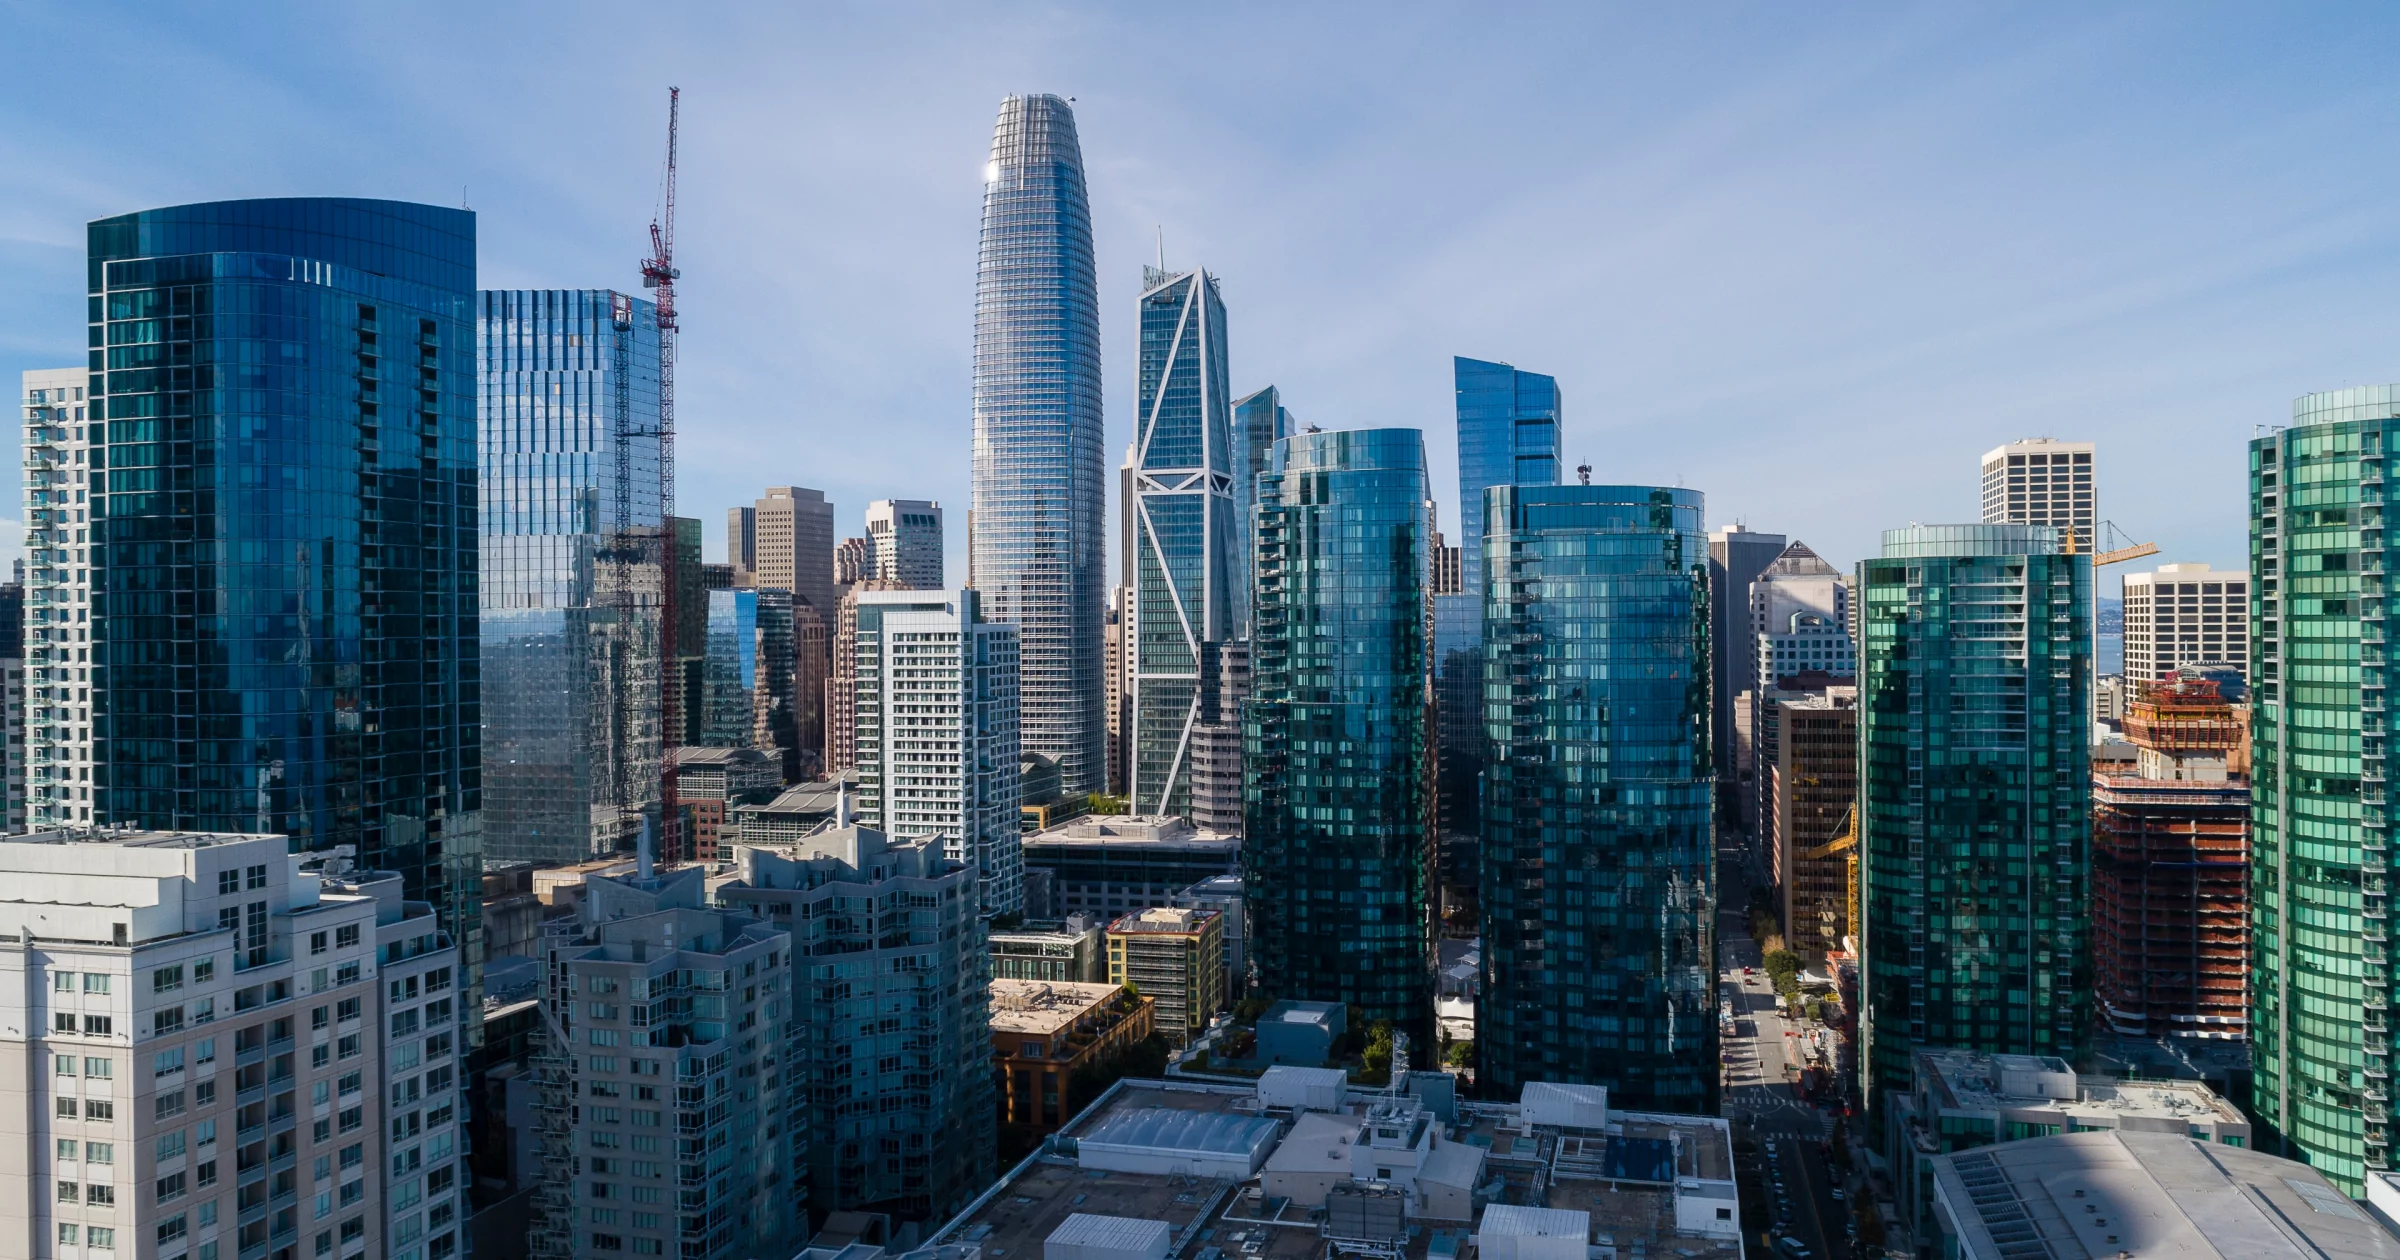 San Francisco Downtown with the major skyscrapers includes Lumina, 181 Fremont, Salesforce Tower and more. Aerial short-distance photo.